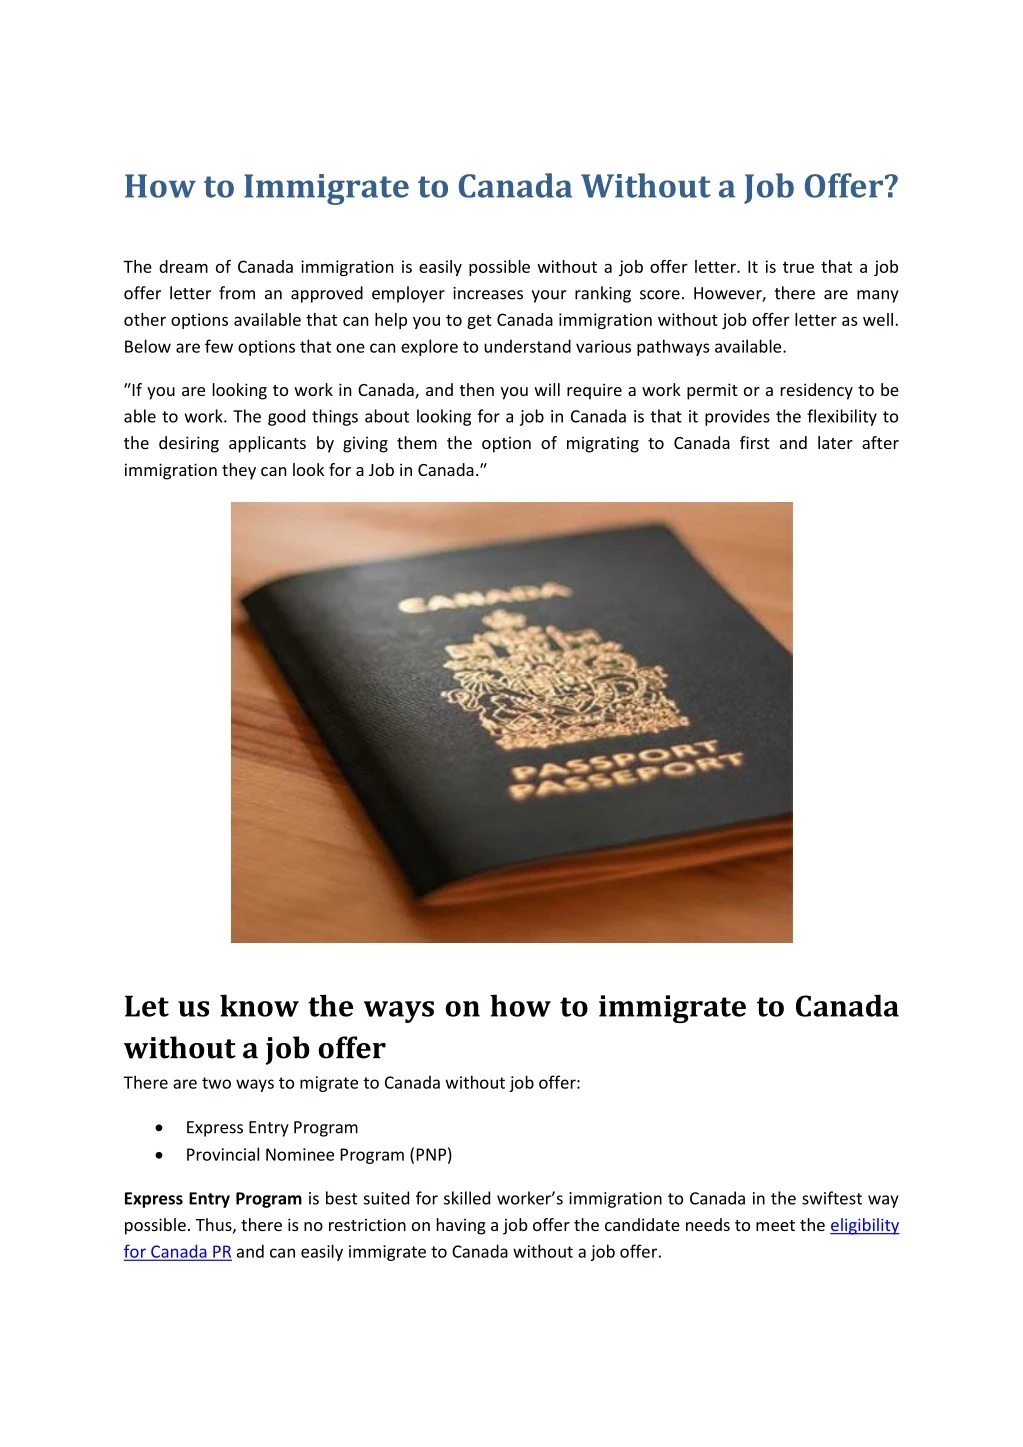 how to immigrate to canada without a job offer